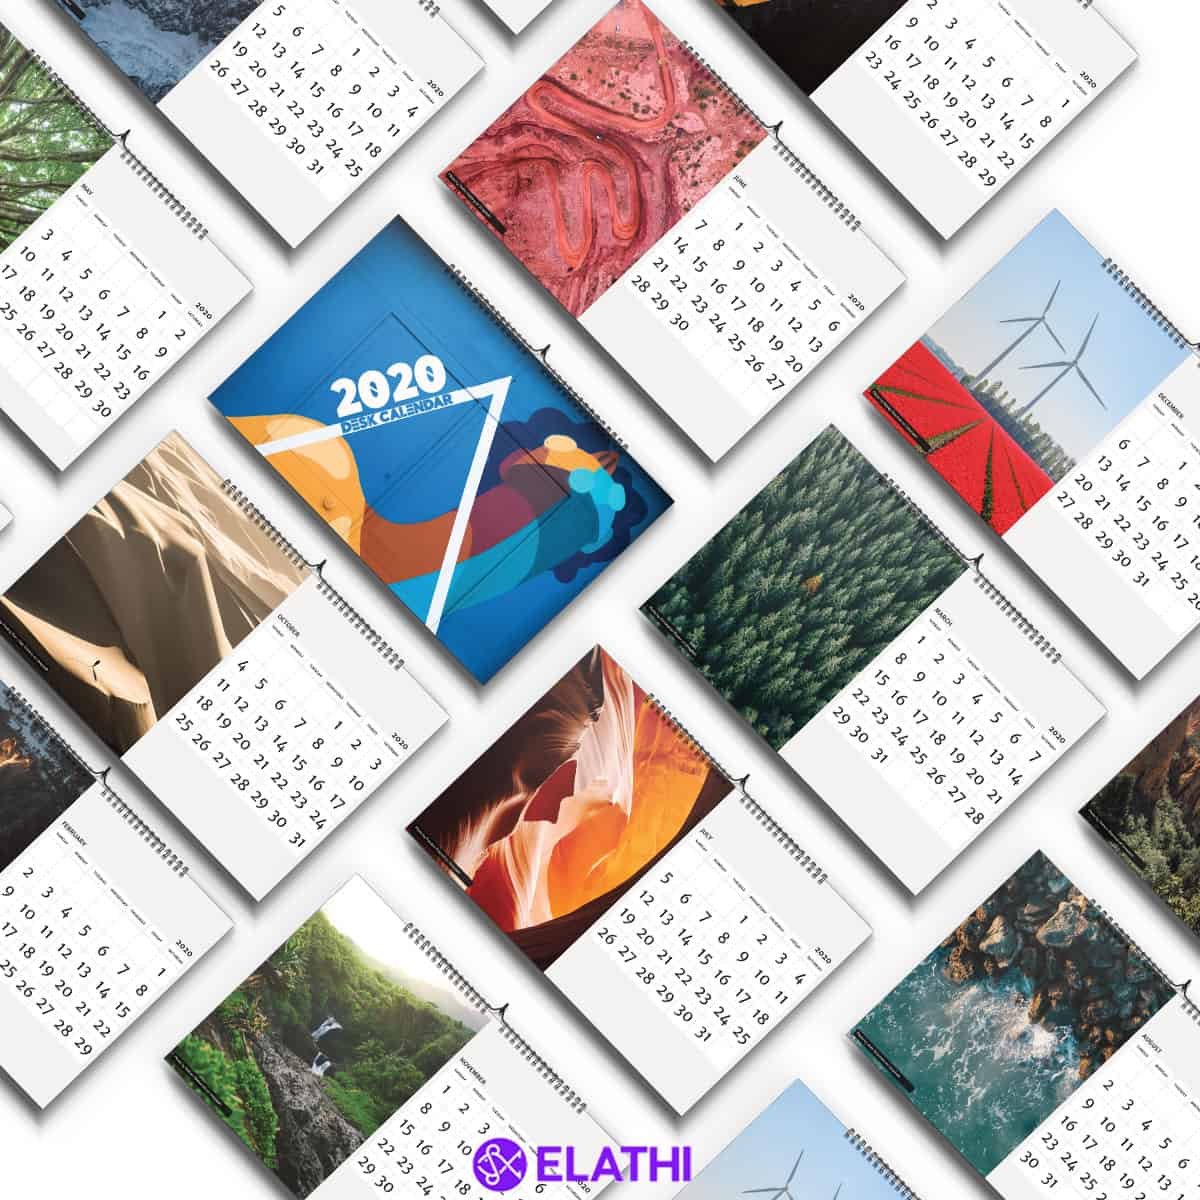 2020 Calendar Design Template Affinity Publisher Share Your Work